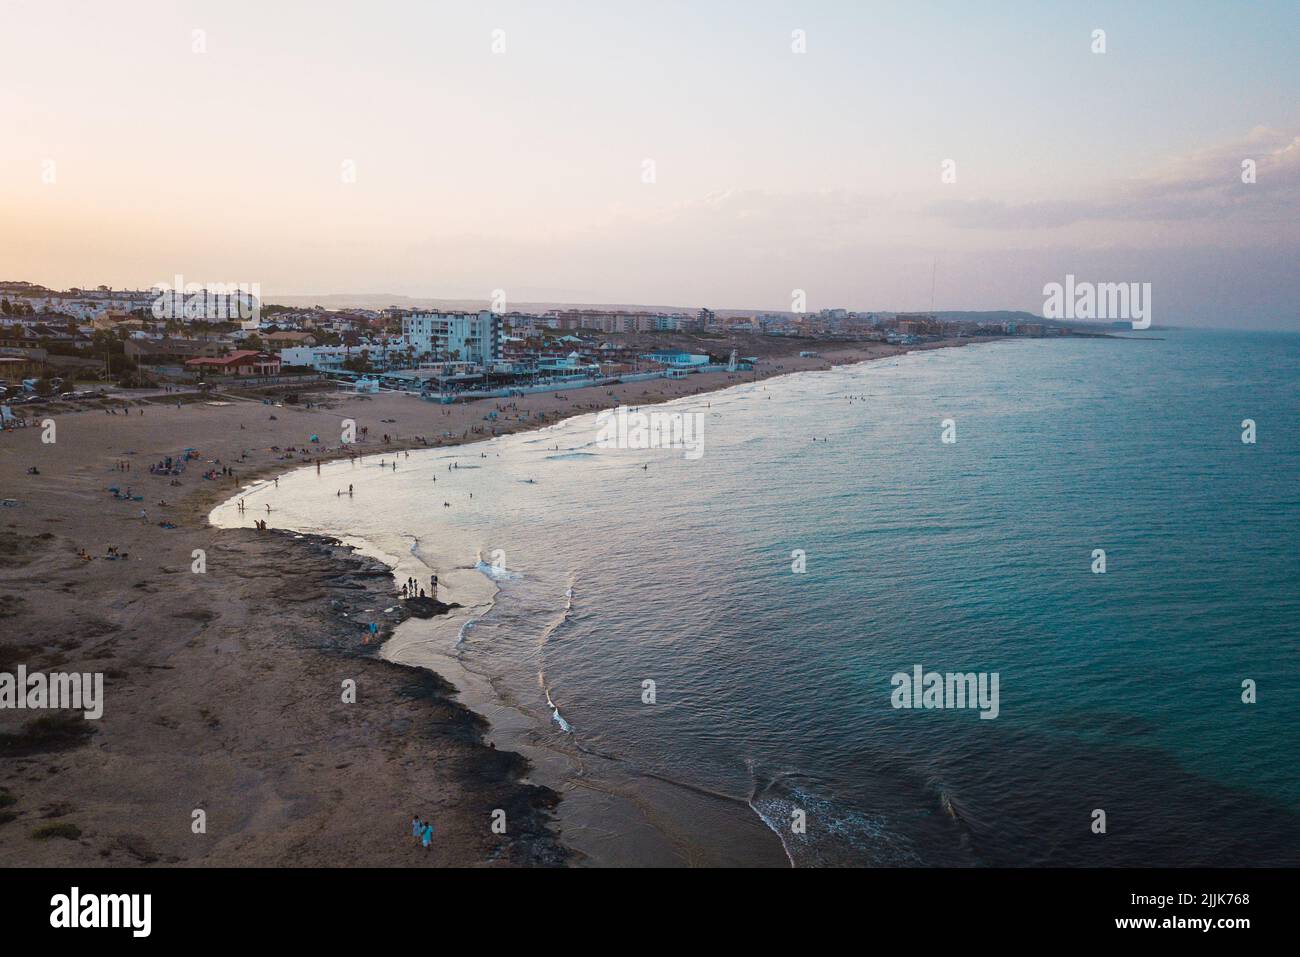 The aerial view of the beach and the sea. Torrevieja in Alicante, Spain. Stock Photo